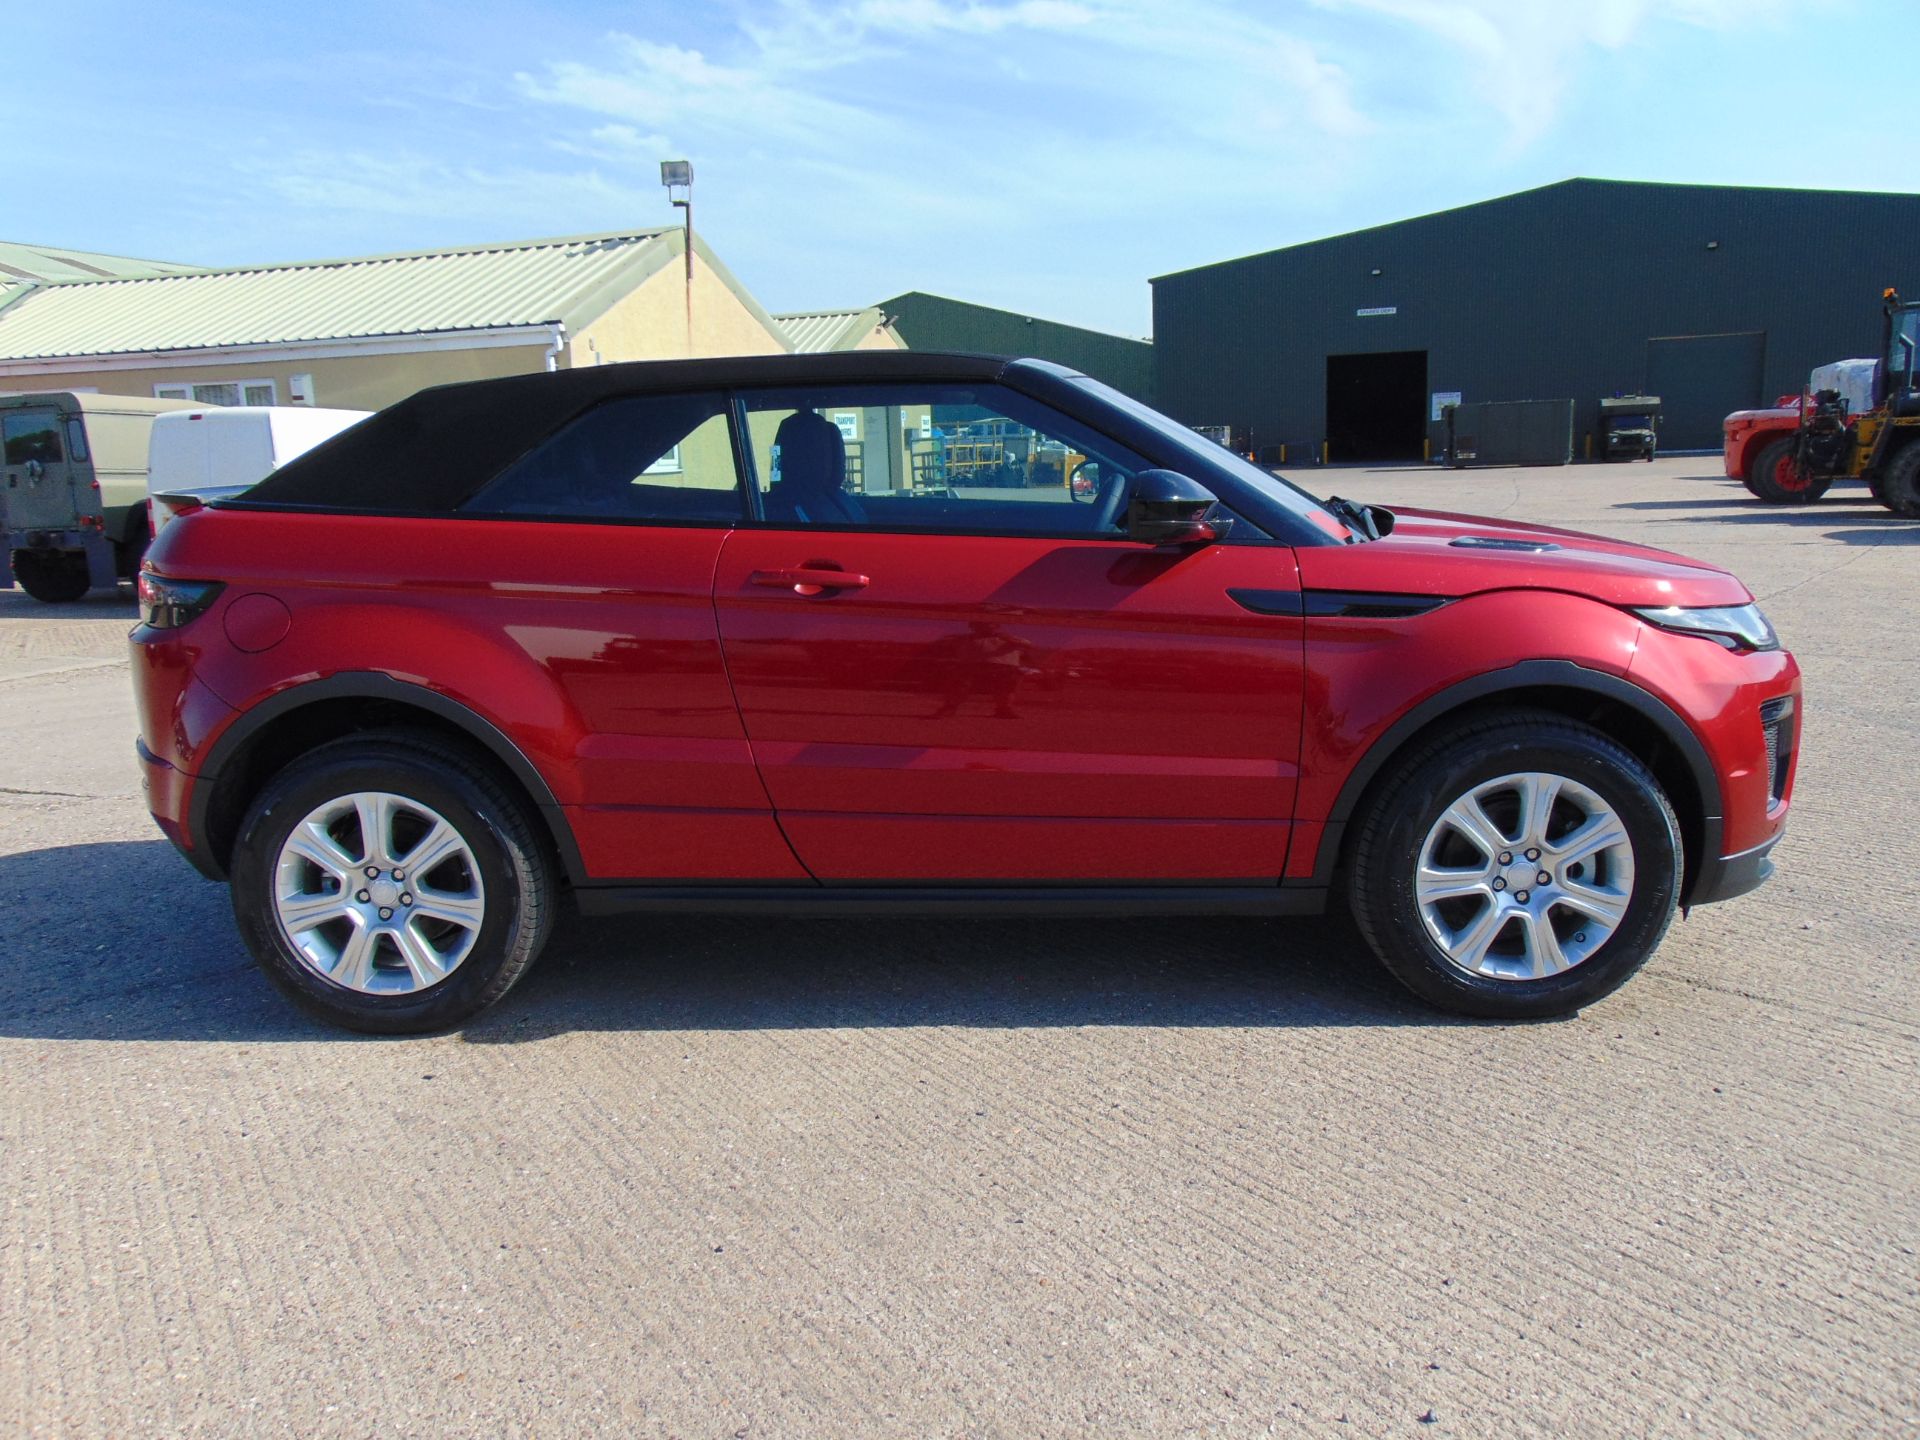 2017 model year a NEW & UNUSED Range Rover Evoque 2.0 i4 HSE dynamic convertible - Image 5 of 39